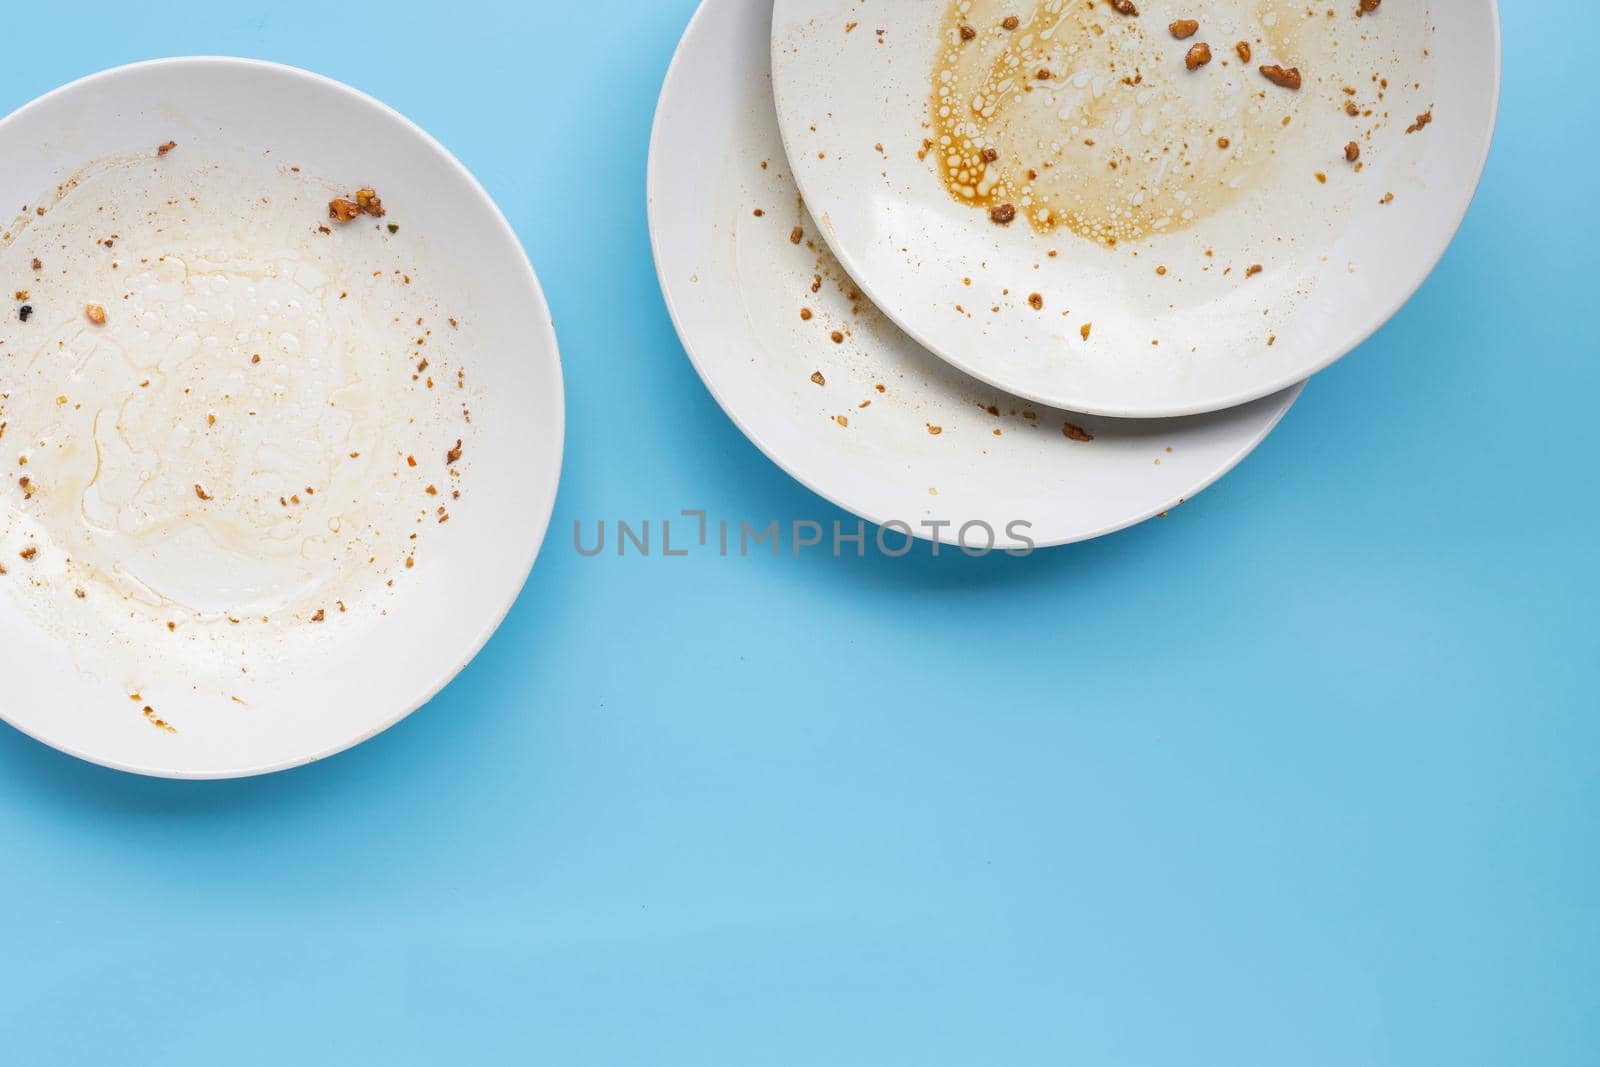 Dirty dishes on blue background. by Bowonpat